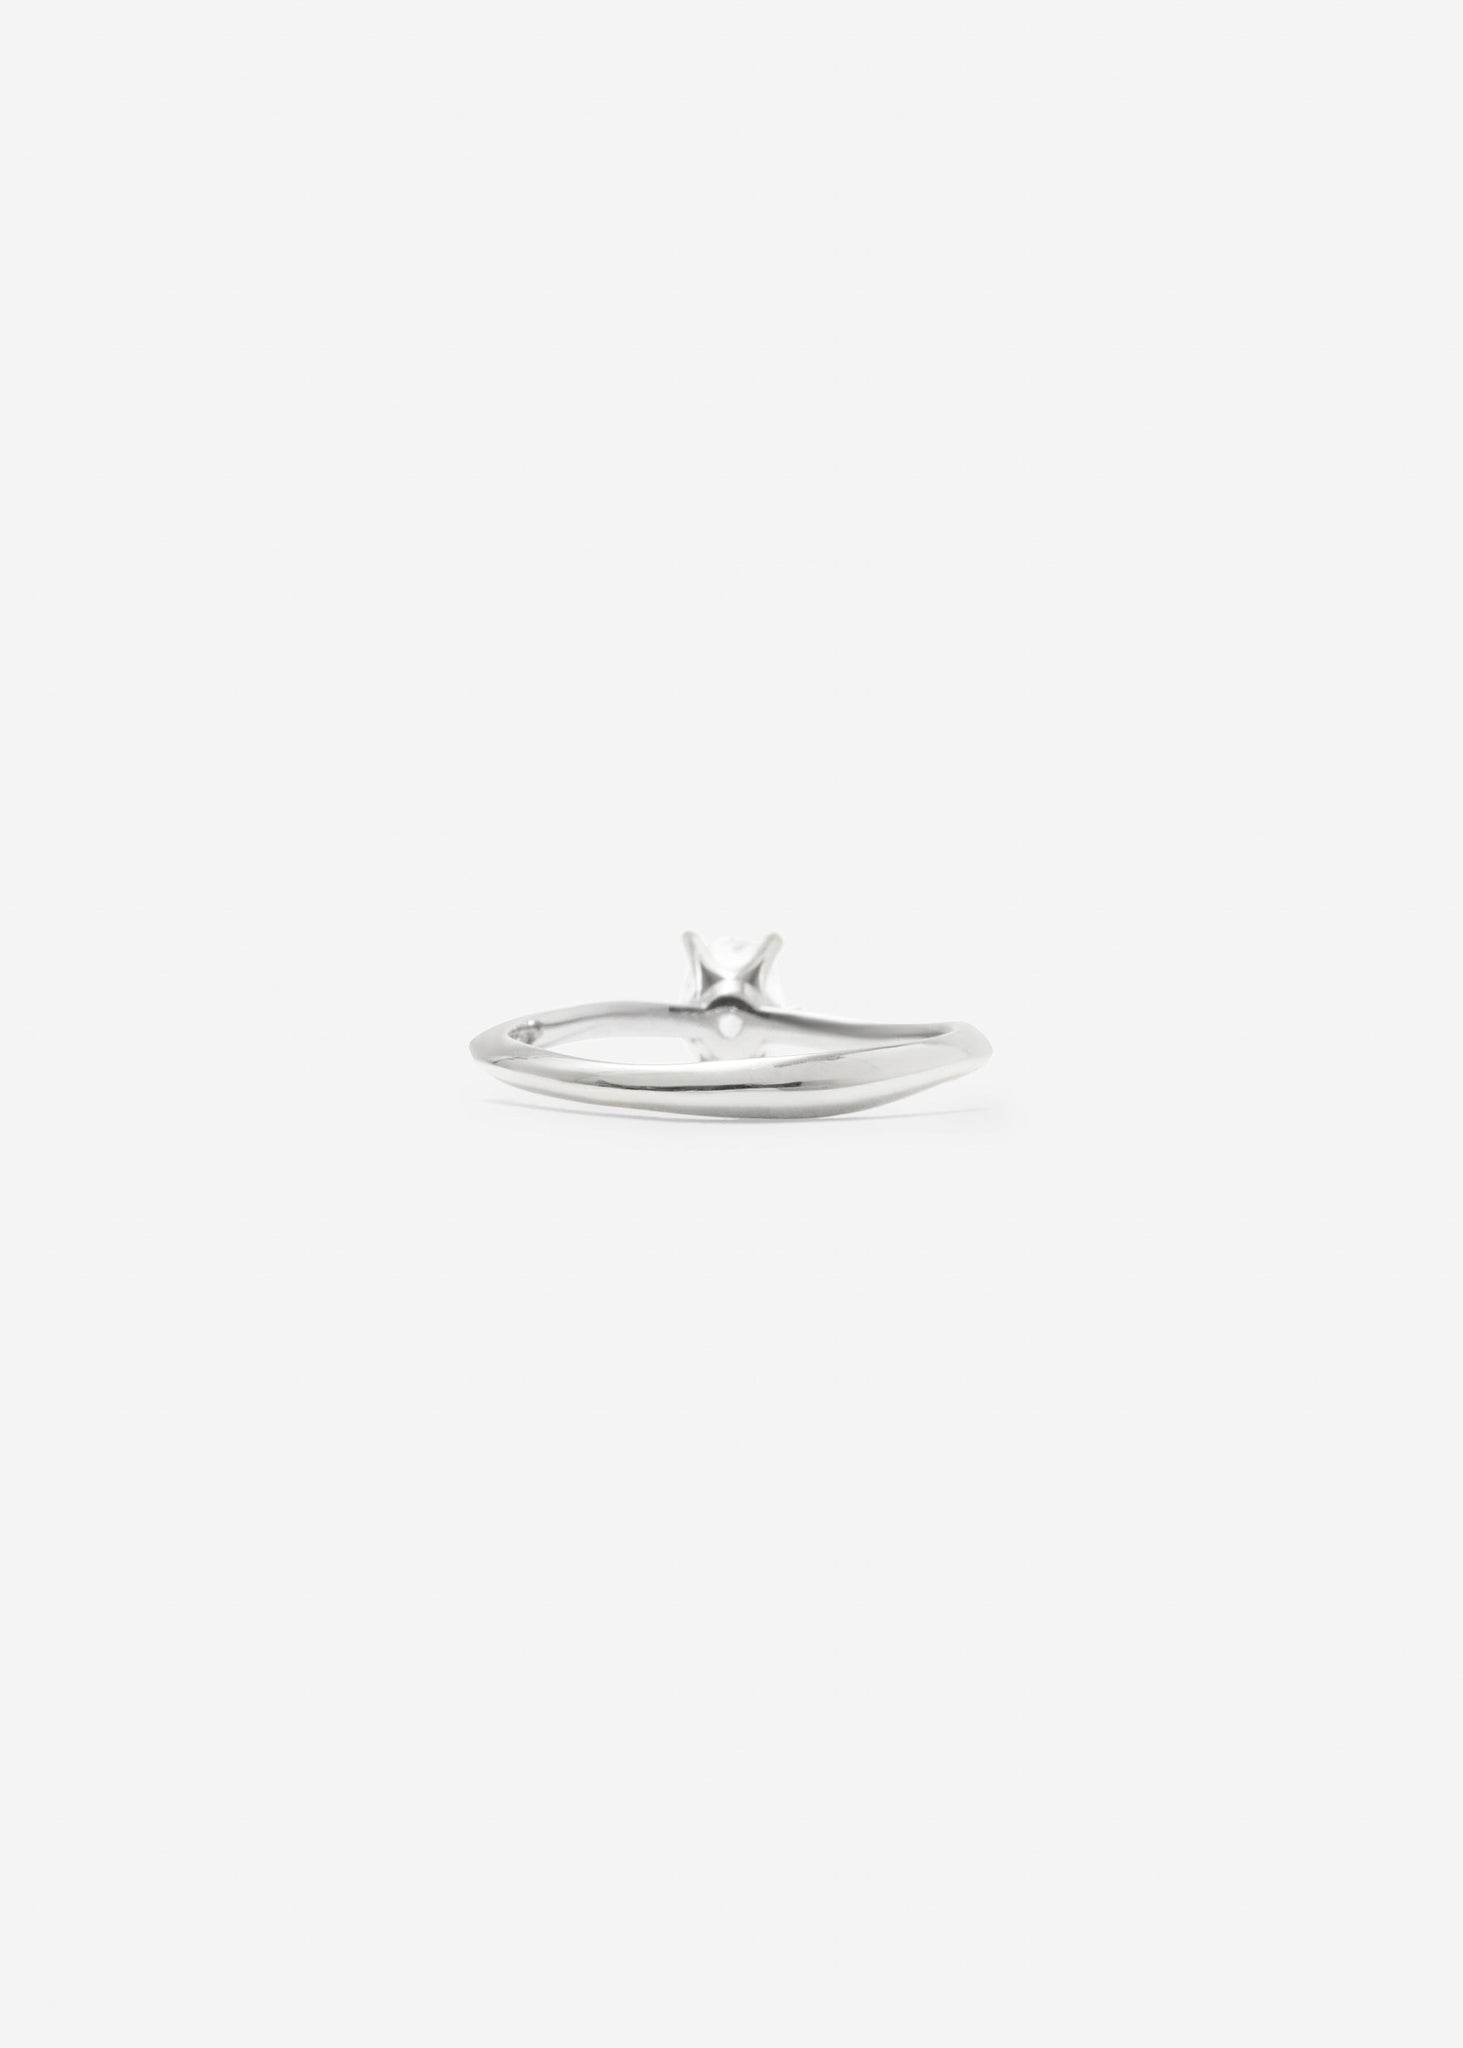 Oval Solitaire Ring Midi 0.3 - 0.5 Ct - Rings - Customised - 4